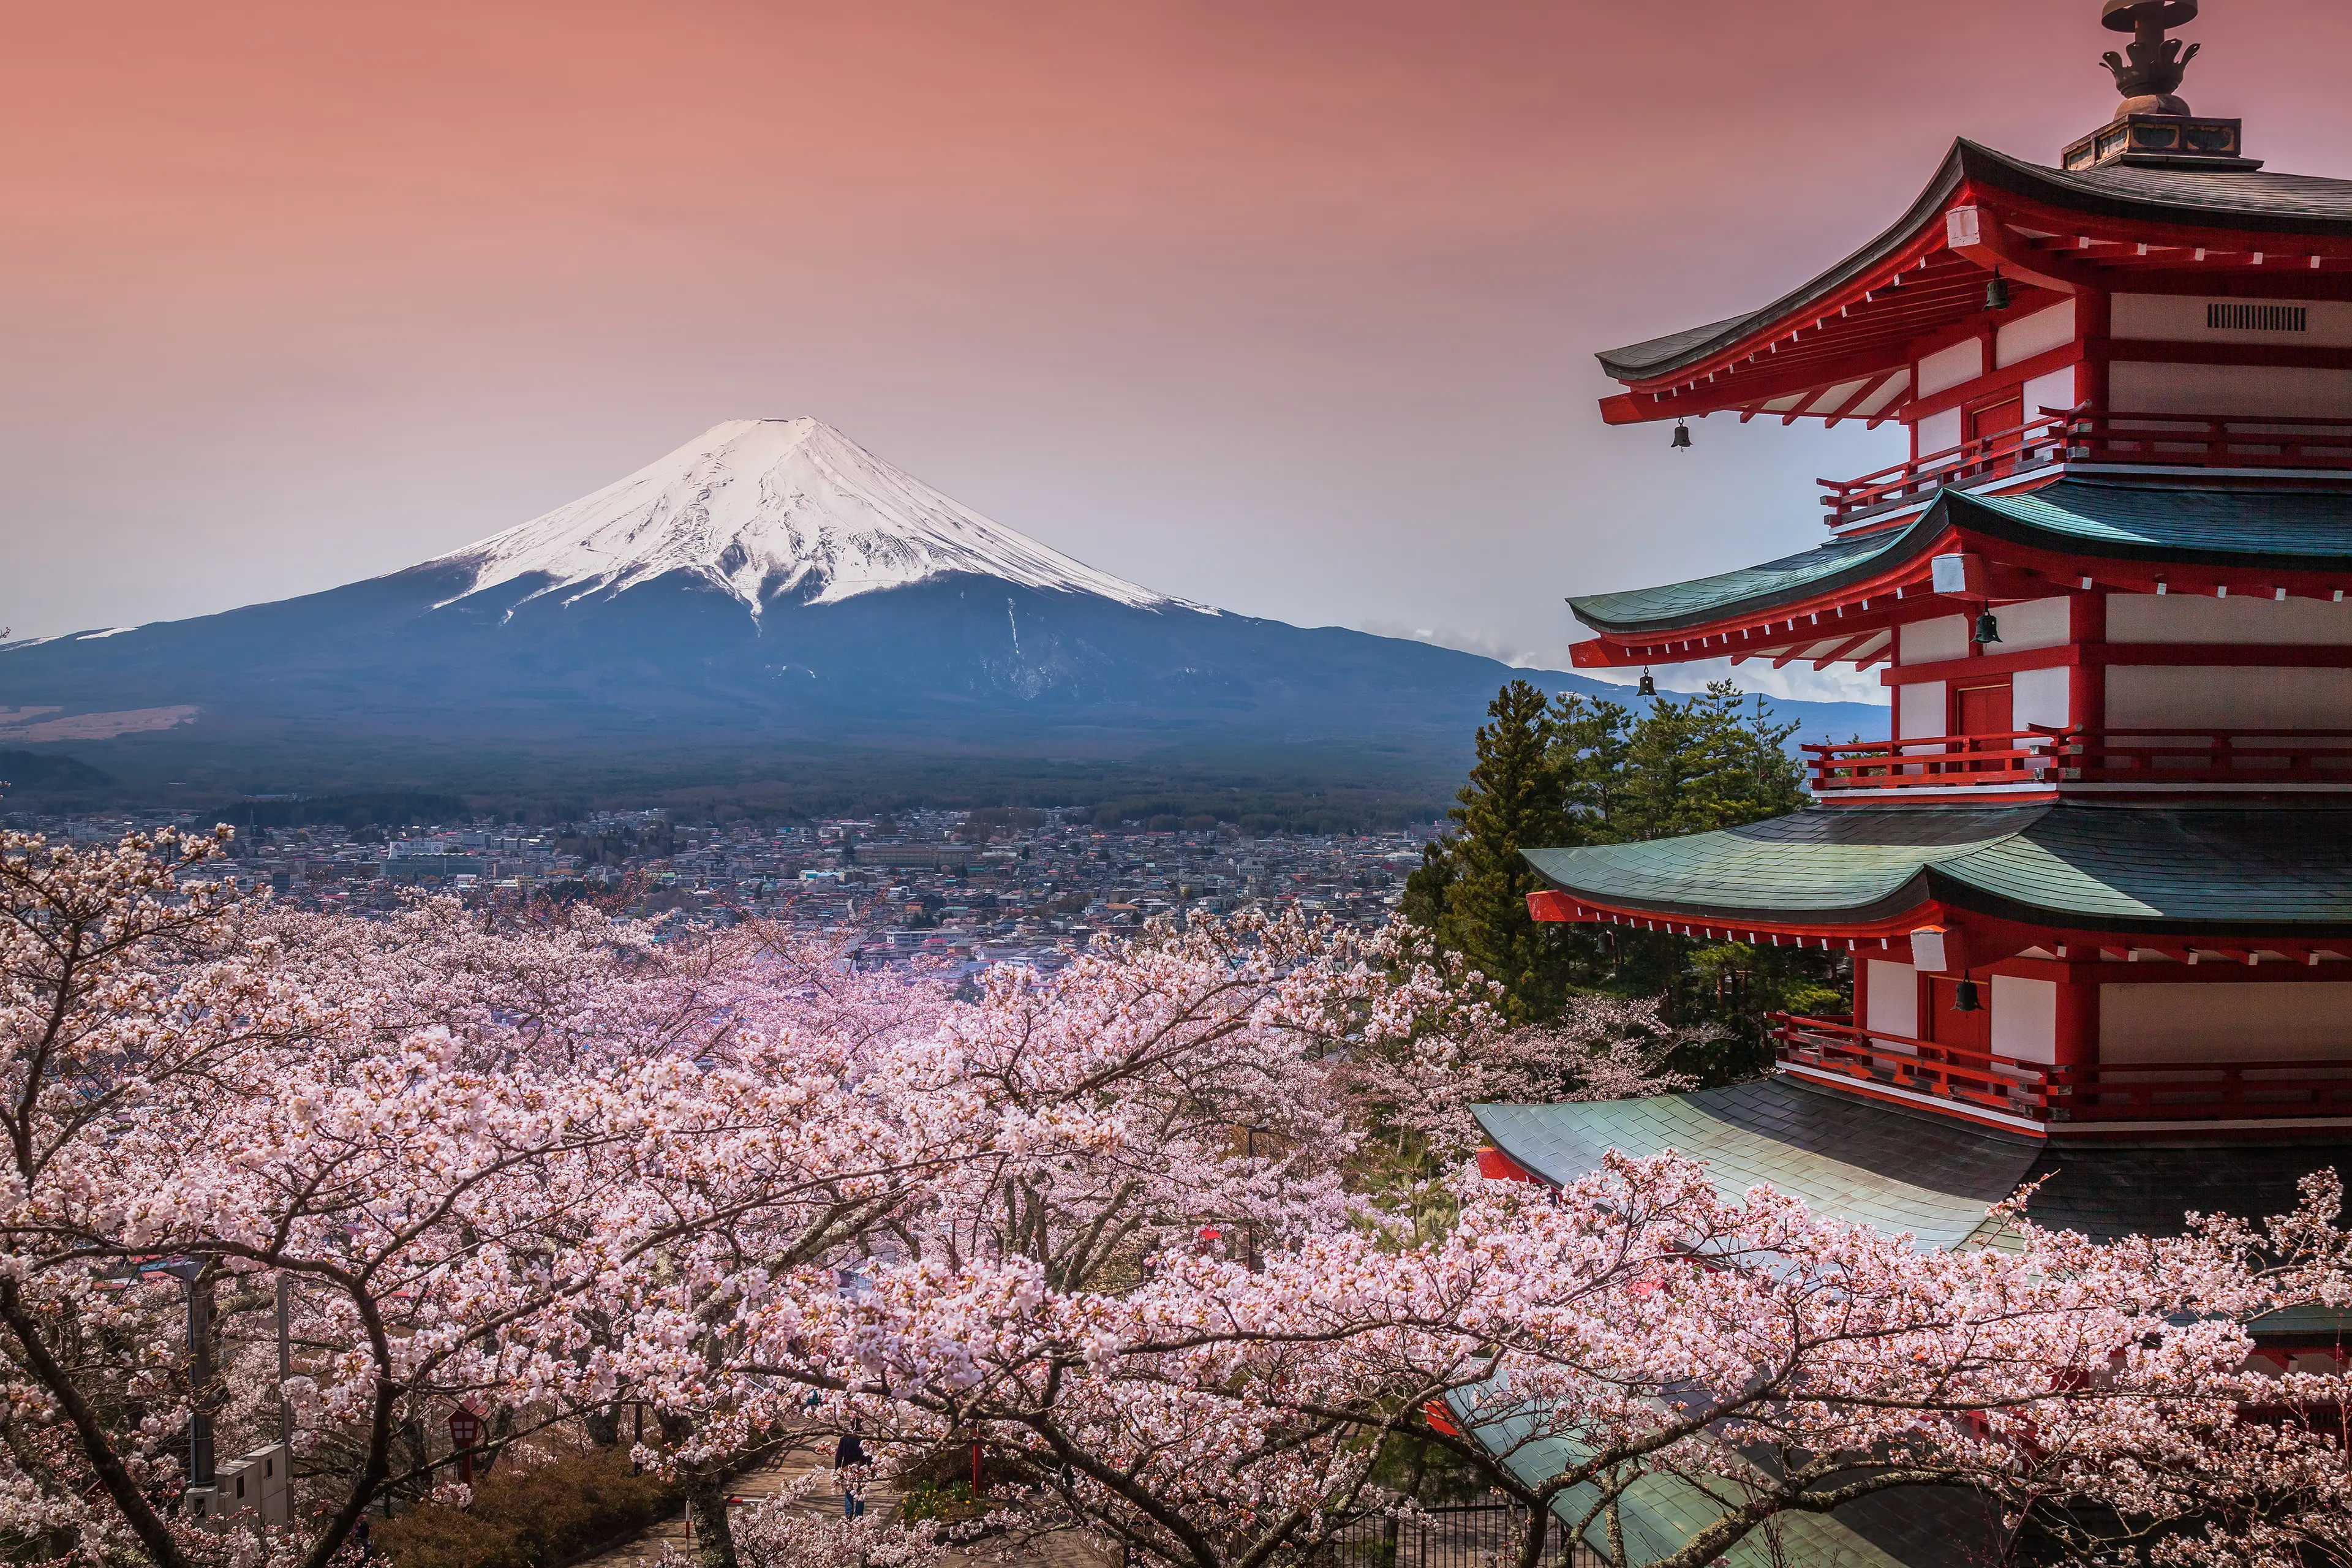 Chureito Pagoda with cherry blossoms and mountain view